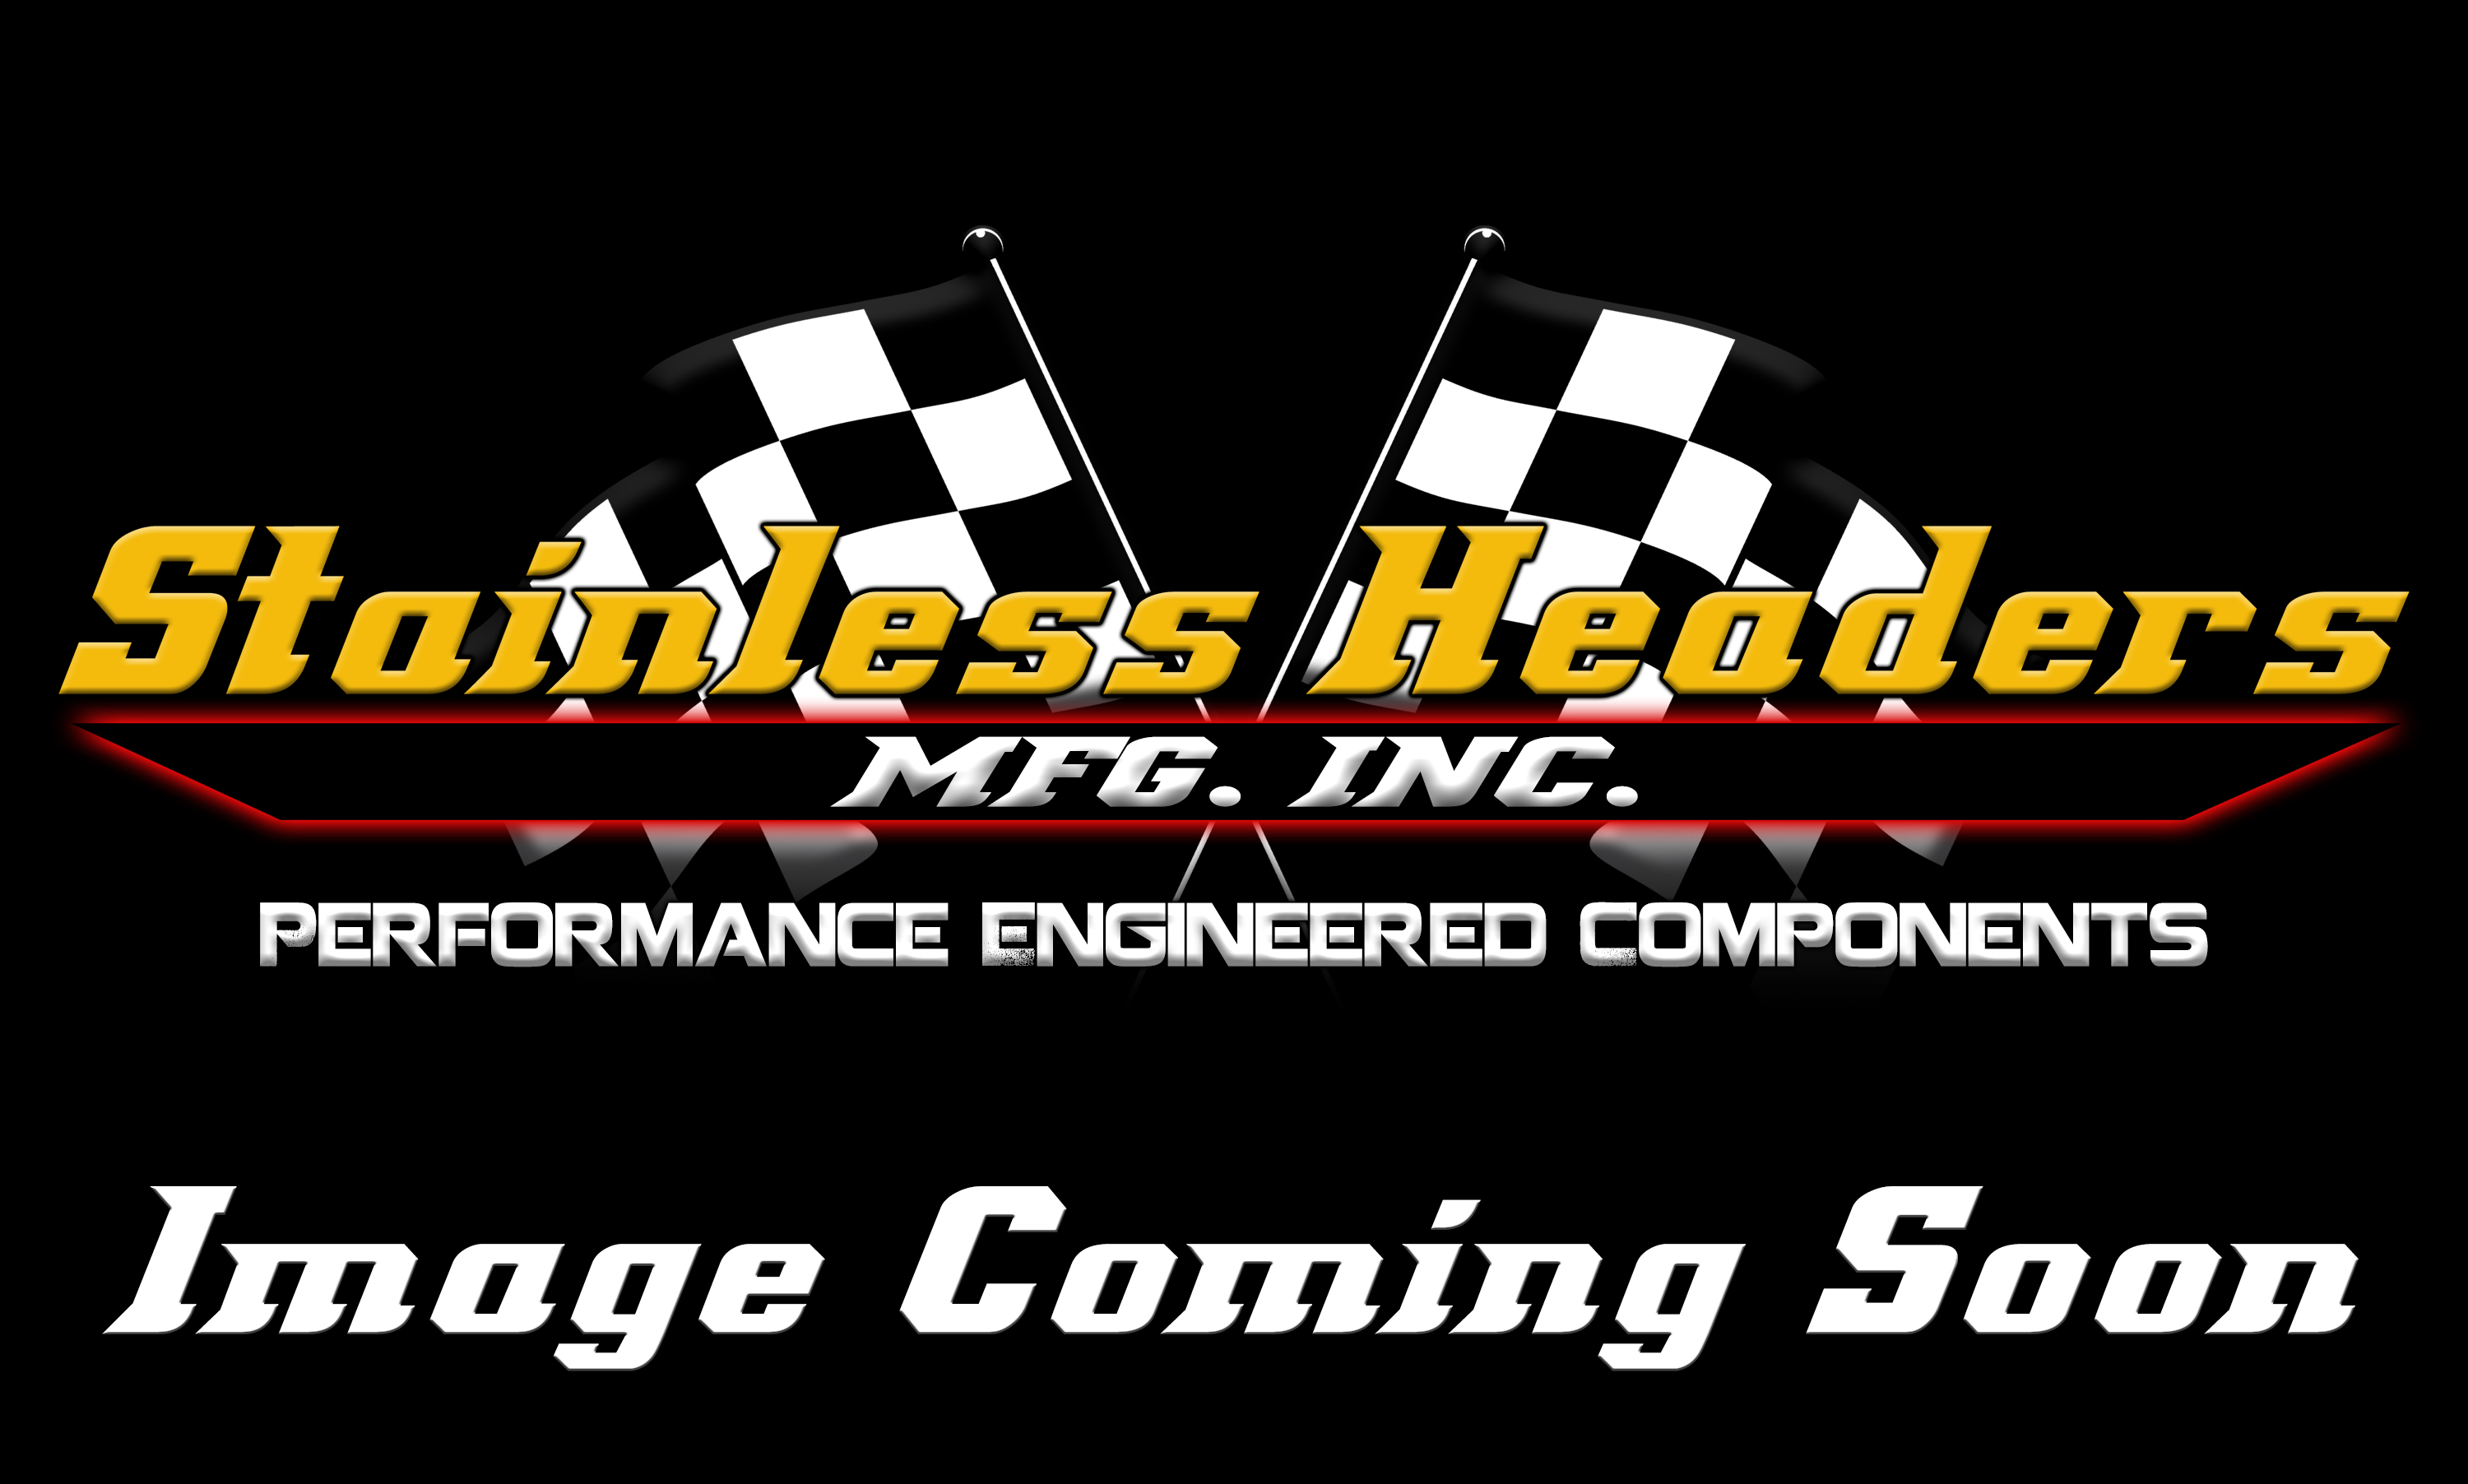 CompTurbo Technologies - CTR4818R-8090 Mid Frame Oil-Less 3.0 Turbocharger (1350 HP) - Image 3